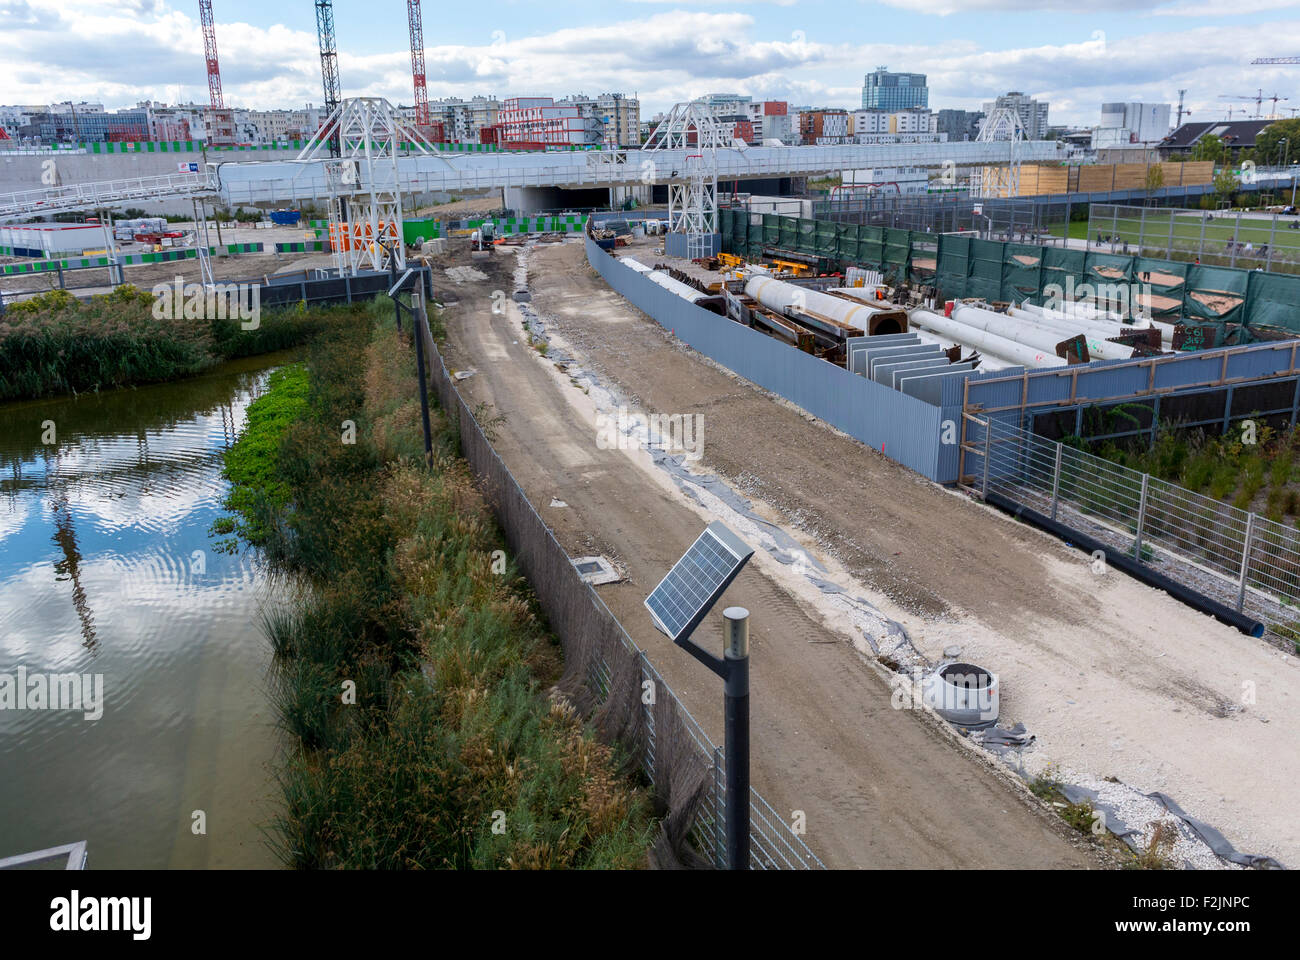 Paris, France, Overview, Aerial, New Modern Architecture Project, Neighborhood, Eco-Quartier Clichy-Batignolles, Stock Photo